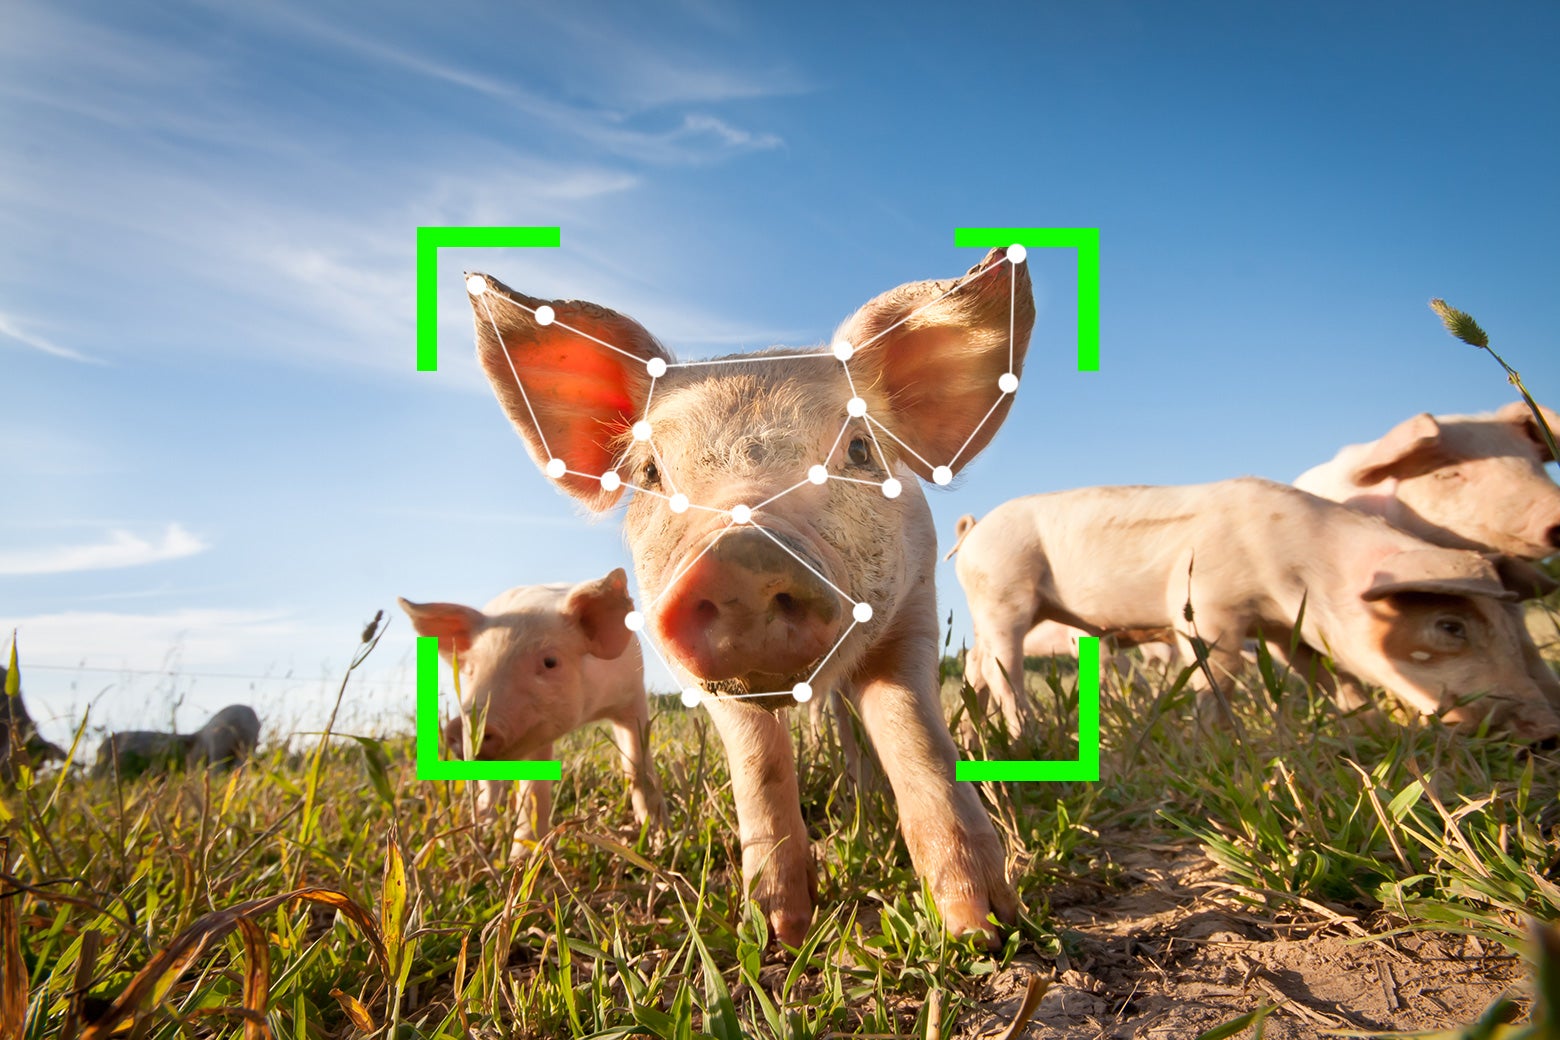 China's embrace of facial recognition technology for pigs.